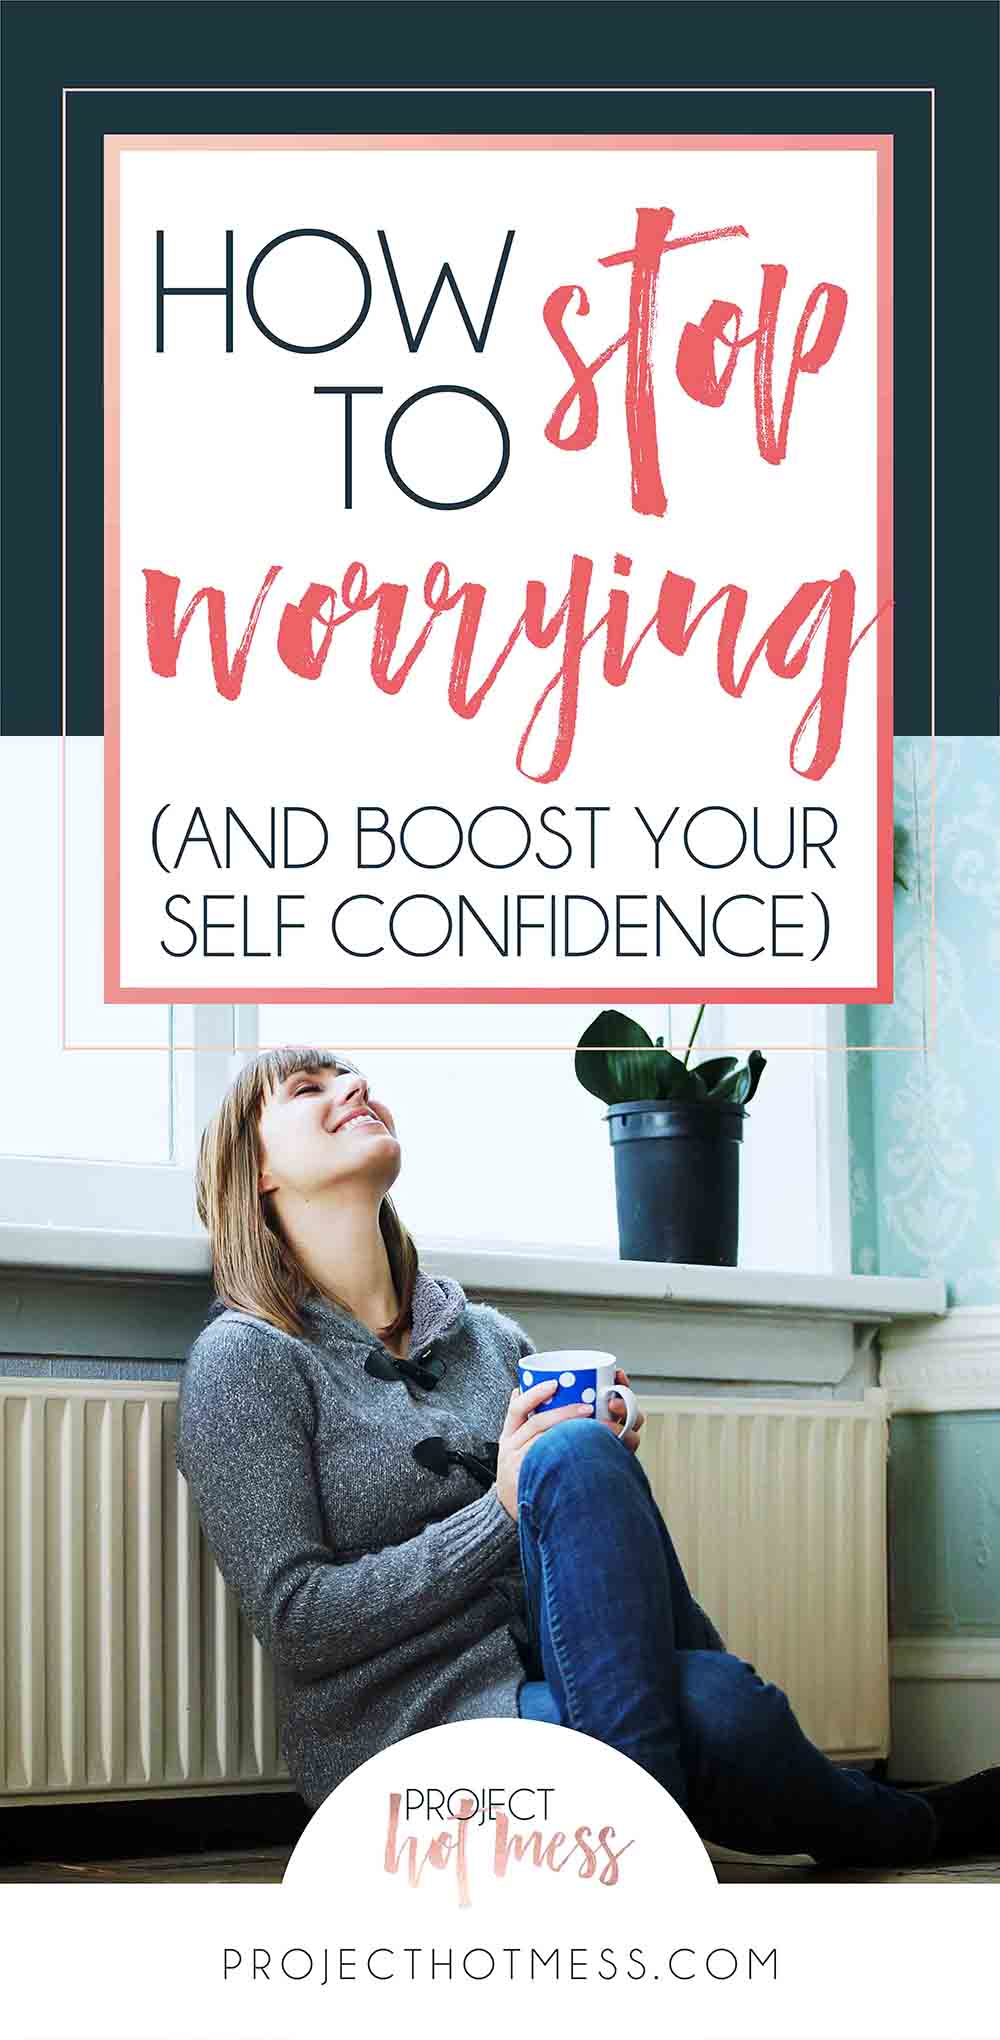 Worry is something we all do at some point but what if it's really a lack of self confidence? Here's how to stop worrying and boost your self confidence too